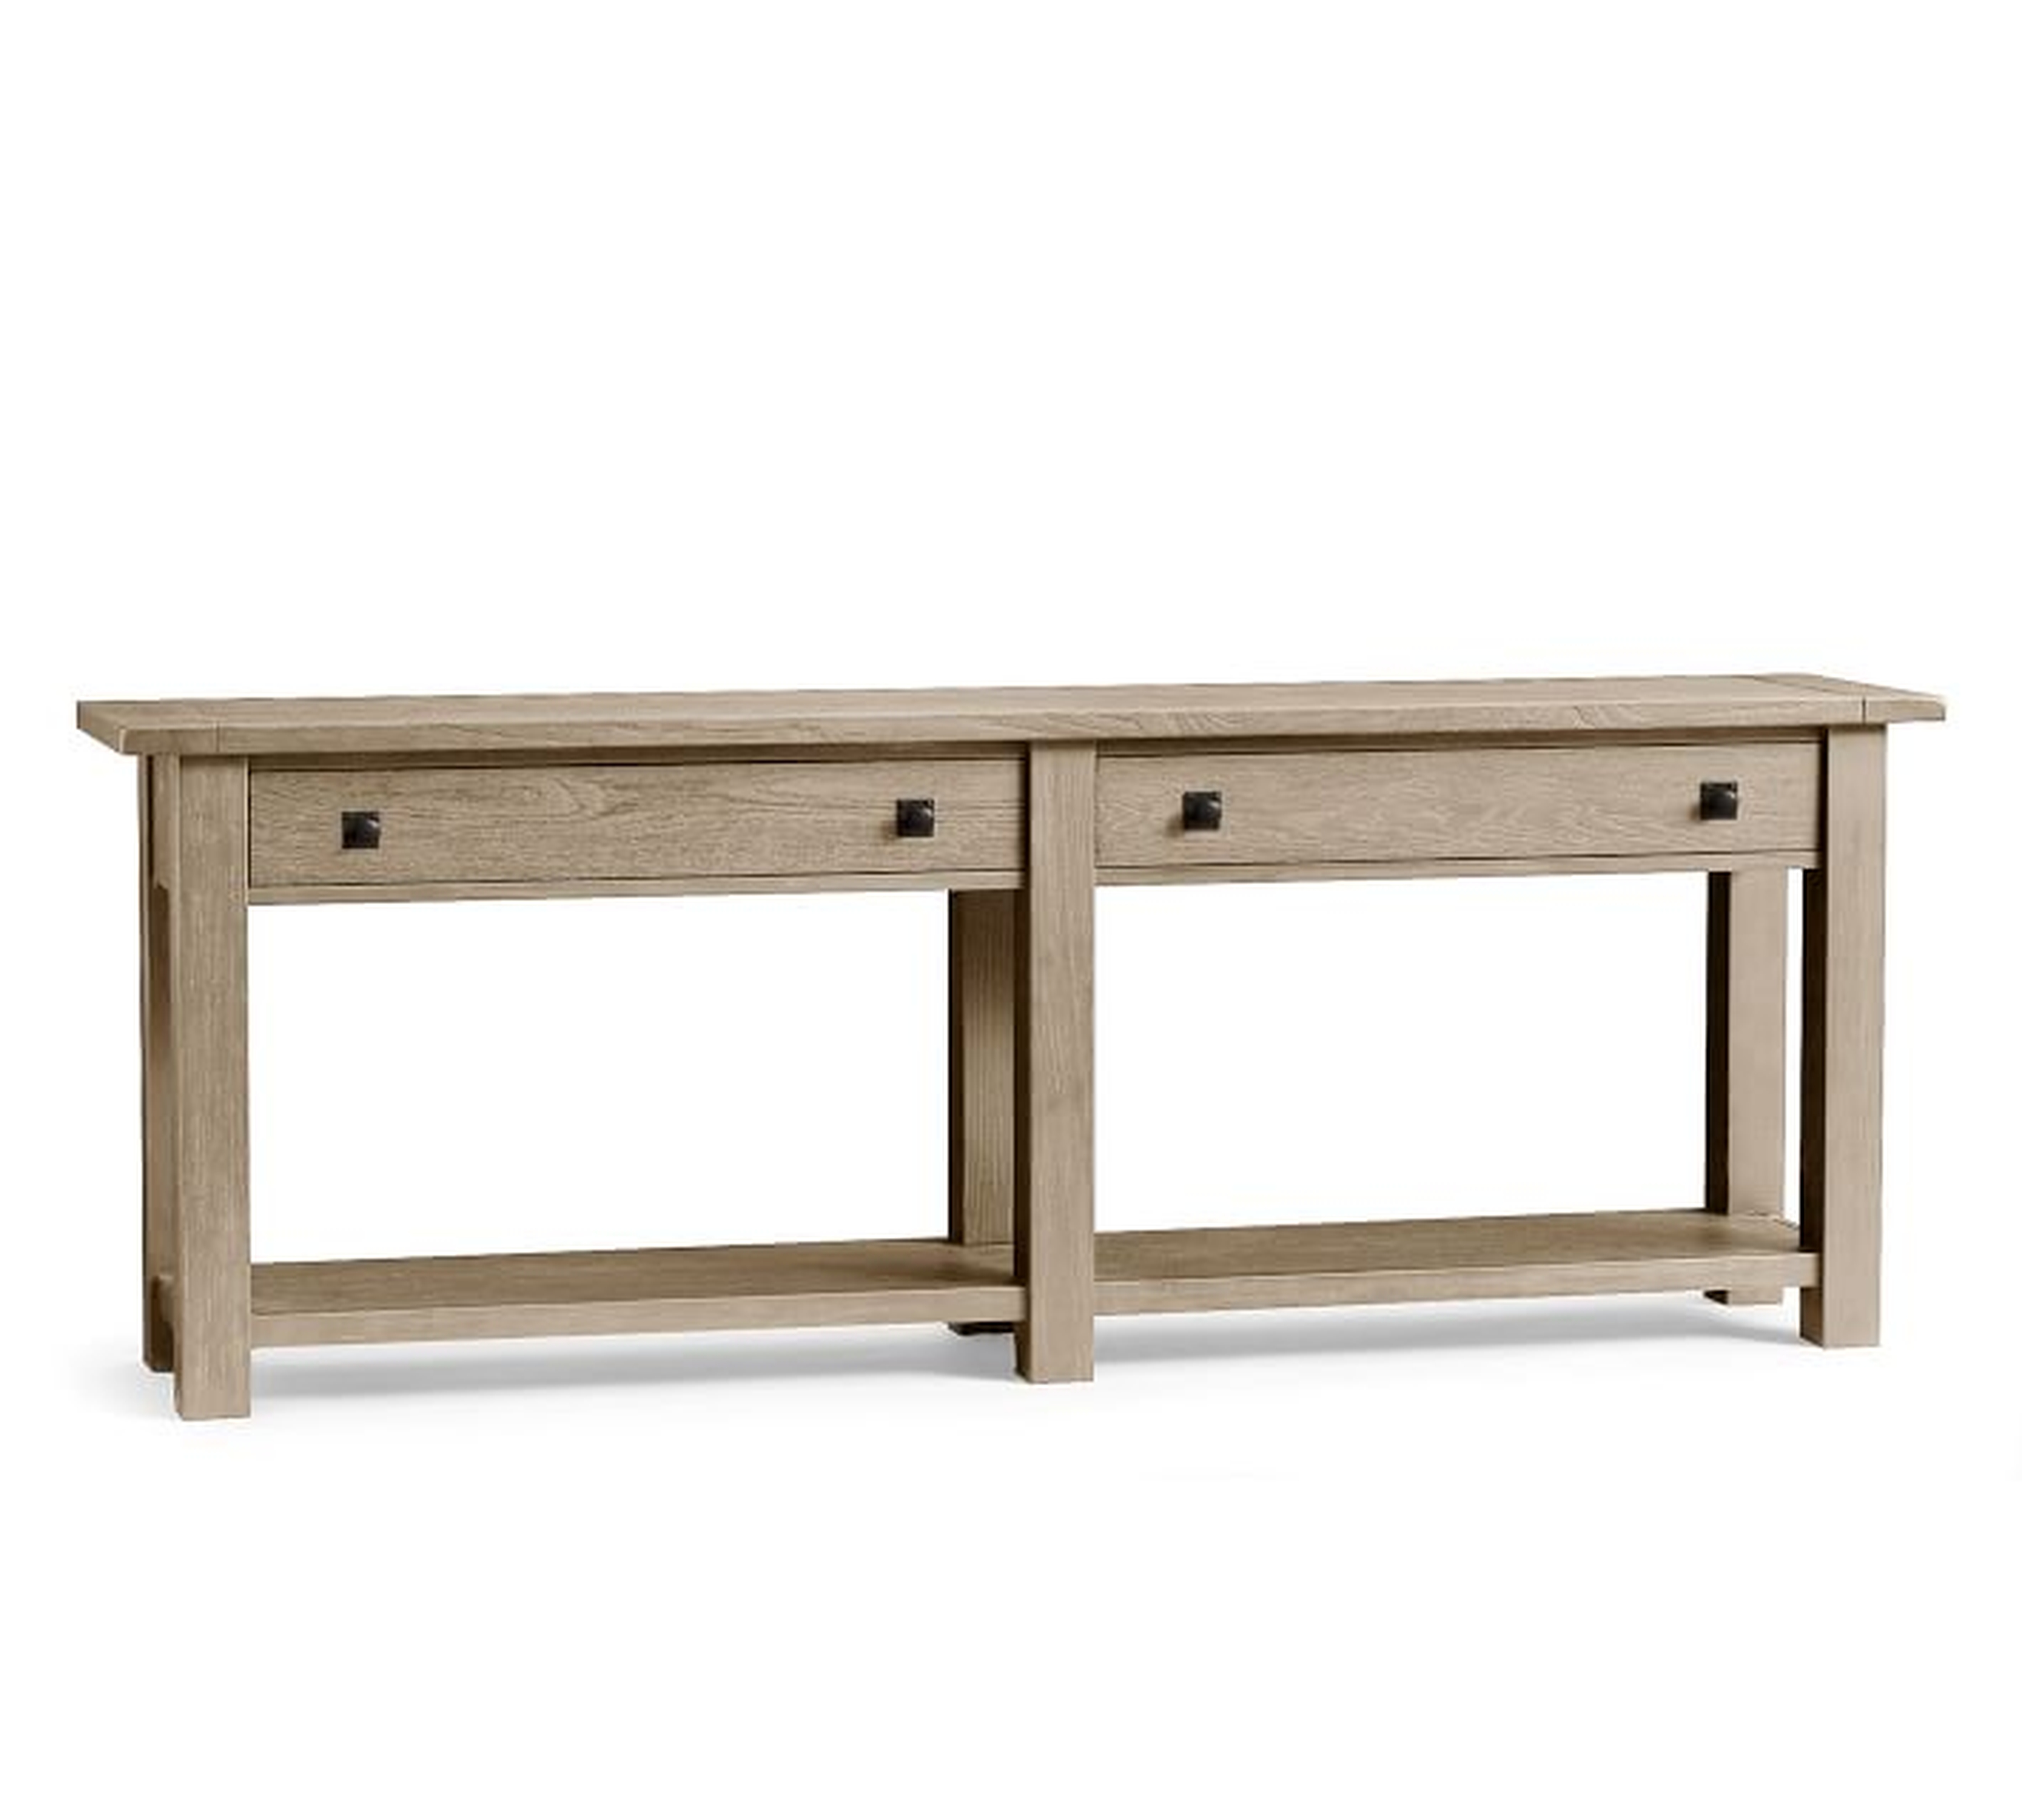 Benchwright 83" Wood Console Table with Drawers, Gray Wash - Pottery Barn